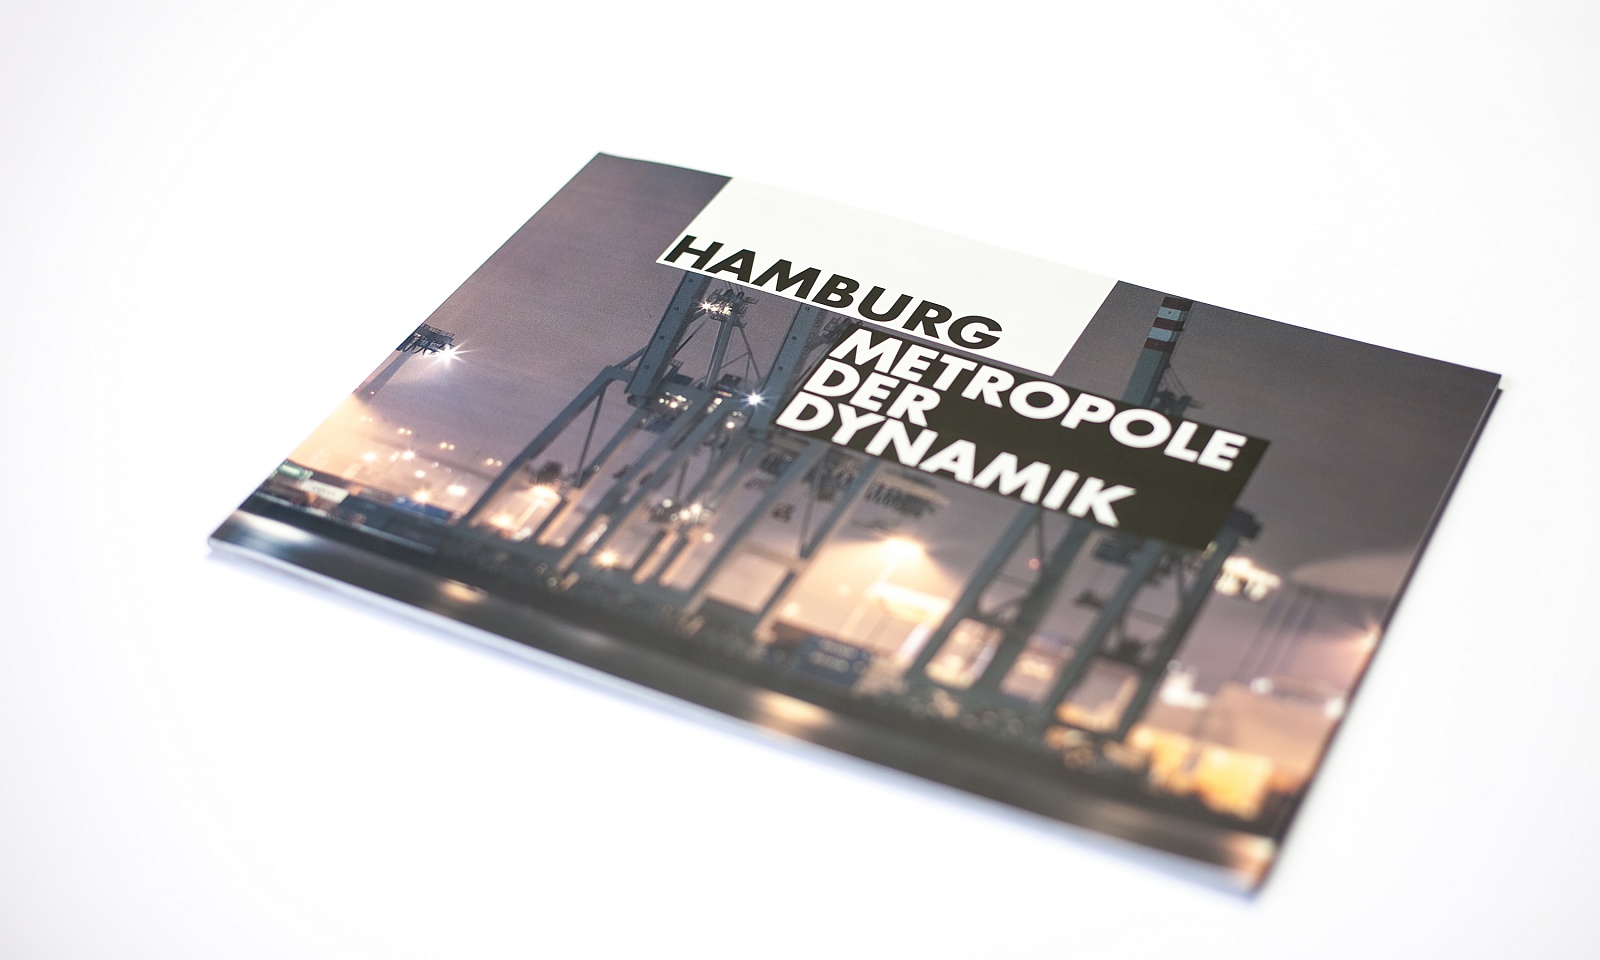 a photo of a closed brochure "hamburg – metropole of dynamic", cover picture shows cranes in the harbor